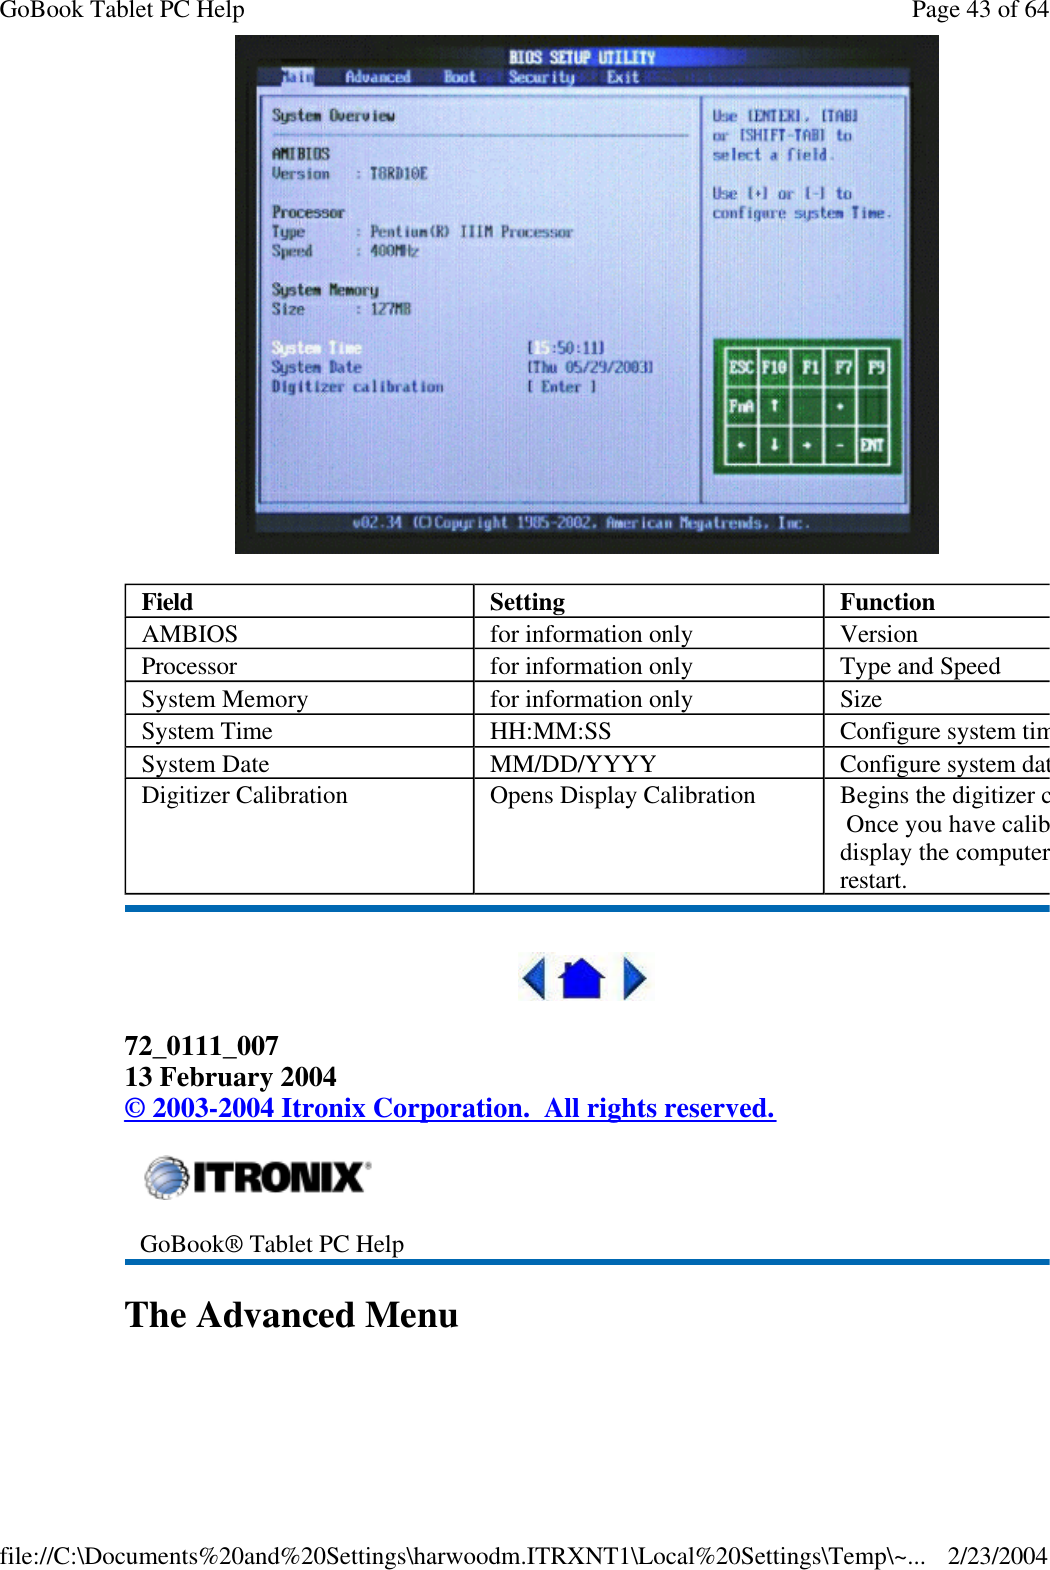   72_0111_007 13 February 2004 © 2003-2004 Itronix Corporation.  All rights reserved. The Advanced Menu  Field  Setting  Function AMBIOS for information only Version Processor for information only Type and Speed System Memory for information only Size System Time HH:MM:SS Configure system timeSystem Date MM/DD/YYYY Configure system dateDigitizer Calibration Opens Display Calibration Begins the digitizer calibration.  Once you have calibrated the display the computer will restart.  GoBook® Tablet PC Help Page 43 of 64GoBook Tablet PC Help2/23/2004file://C:\Documents%20and%20Settings\harwoodm.ITRXNT1\Local%20Settings\Temp\~...